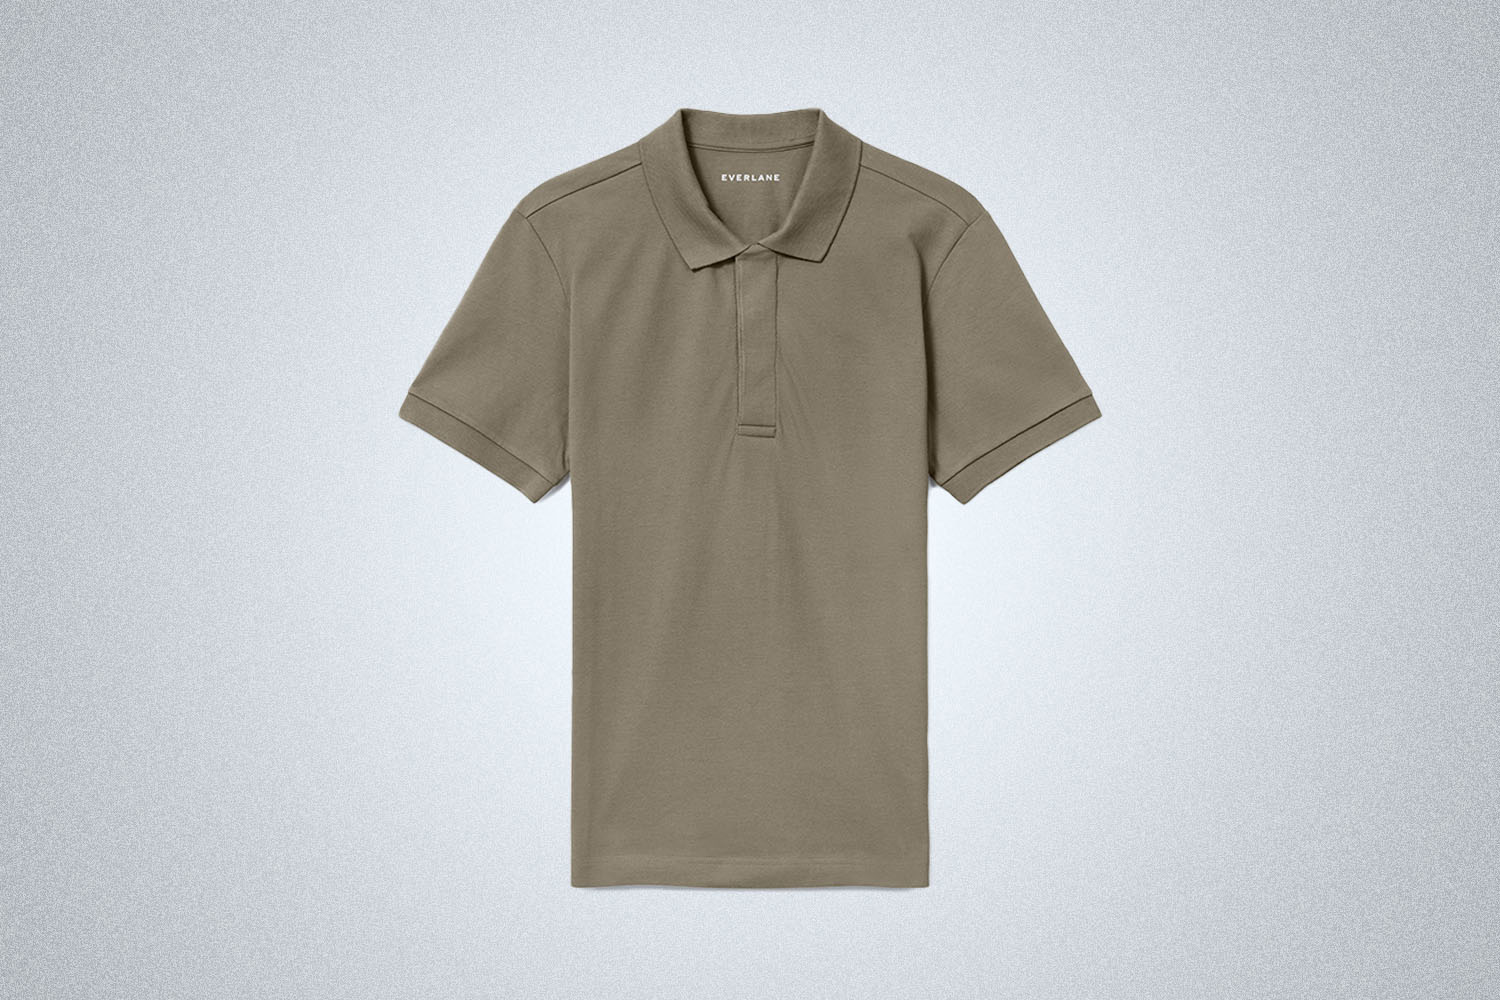 An Everlane Polo on a grey background